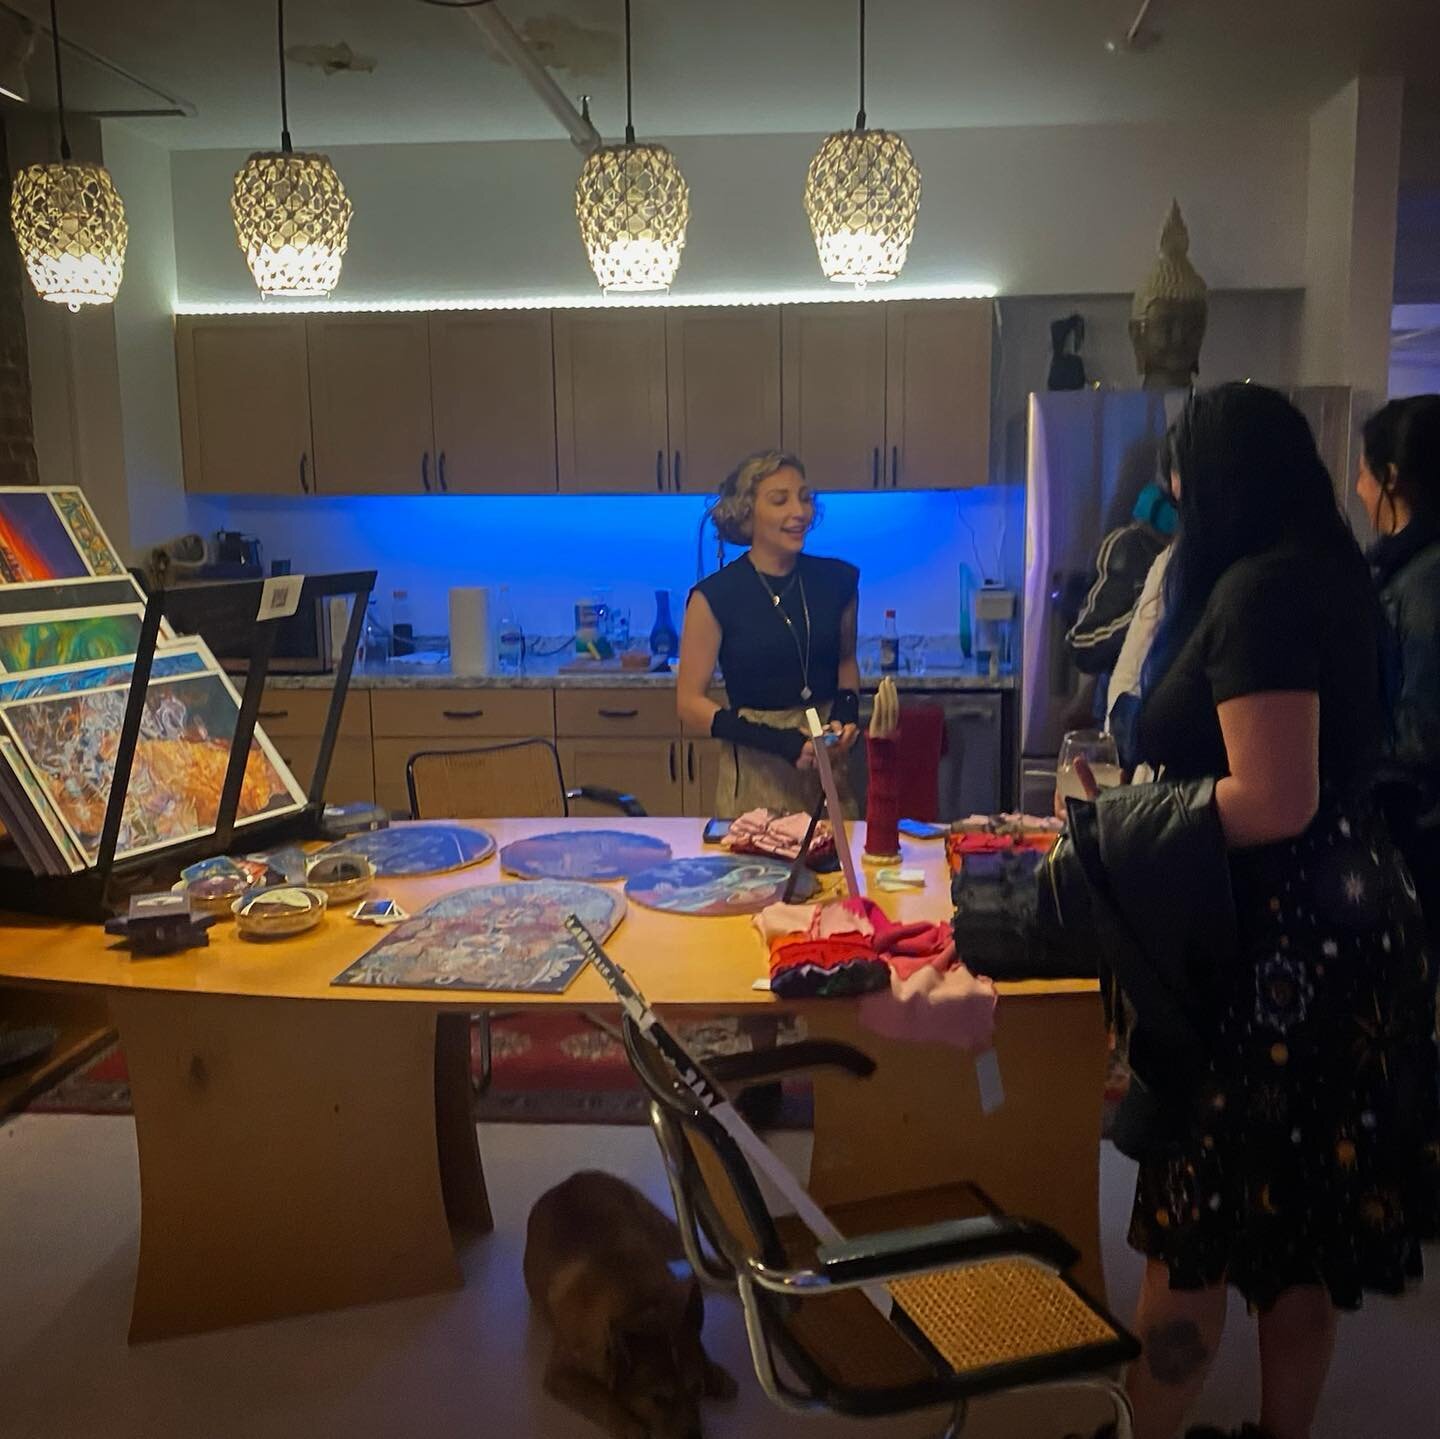 ✨ Exciting Artist Merch Table Experience at Studio Suite 601! 🎨

Had an incredible time manning the Artist Merch table at Studio Suite 601 during the First Thursday Pioneer Square Artwalk! 🌟 It was a night filled with vibrant creativity and connect